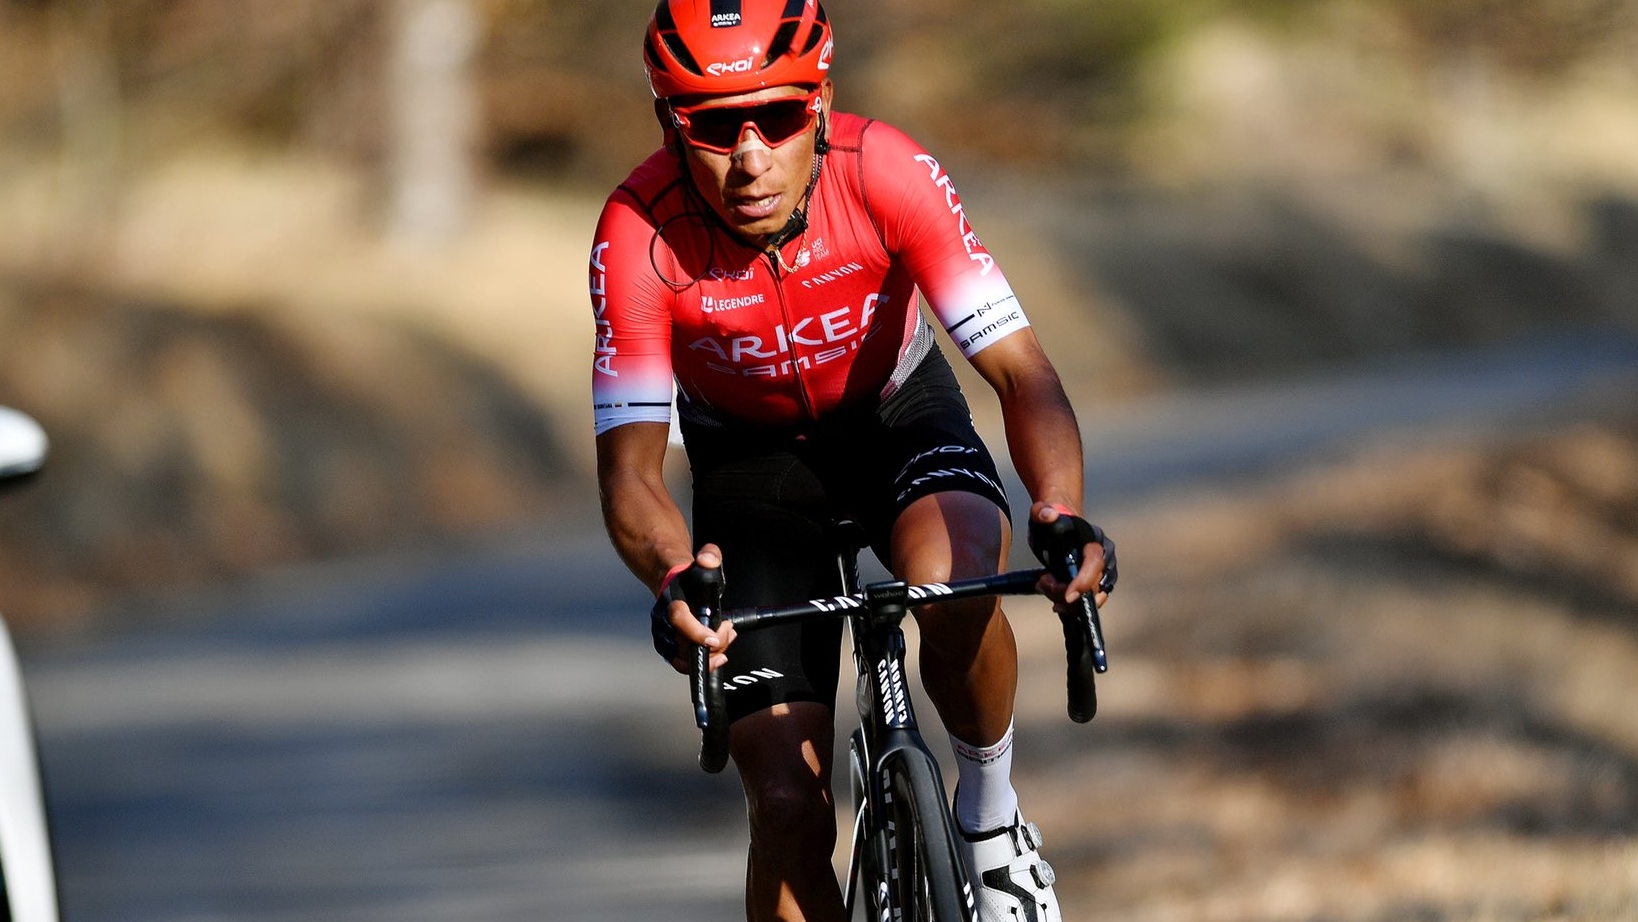 These will be Nairo Quintana's next races before facing the Tour de France  - Infobae